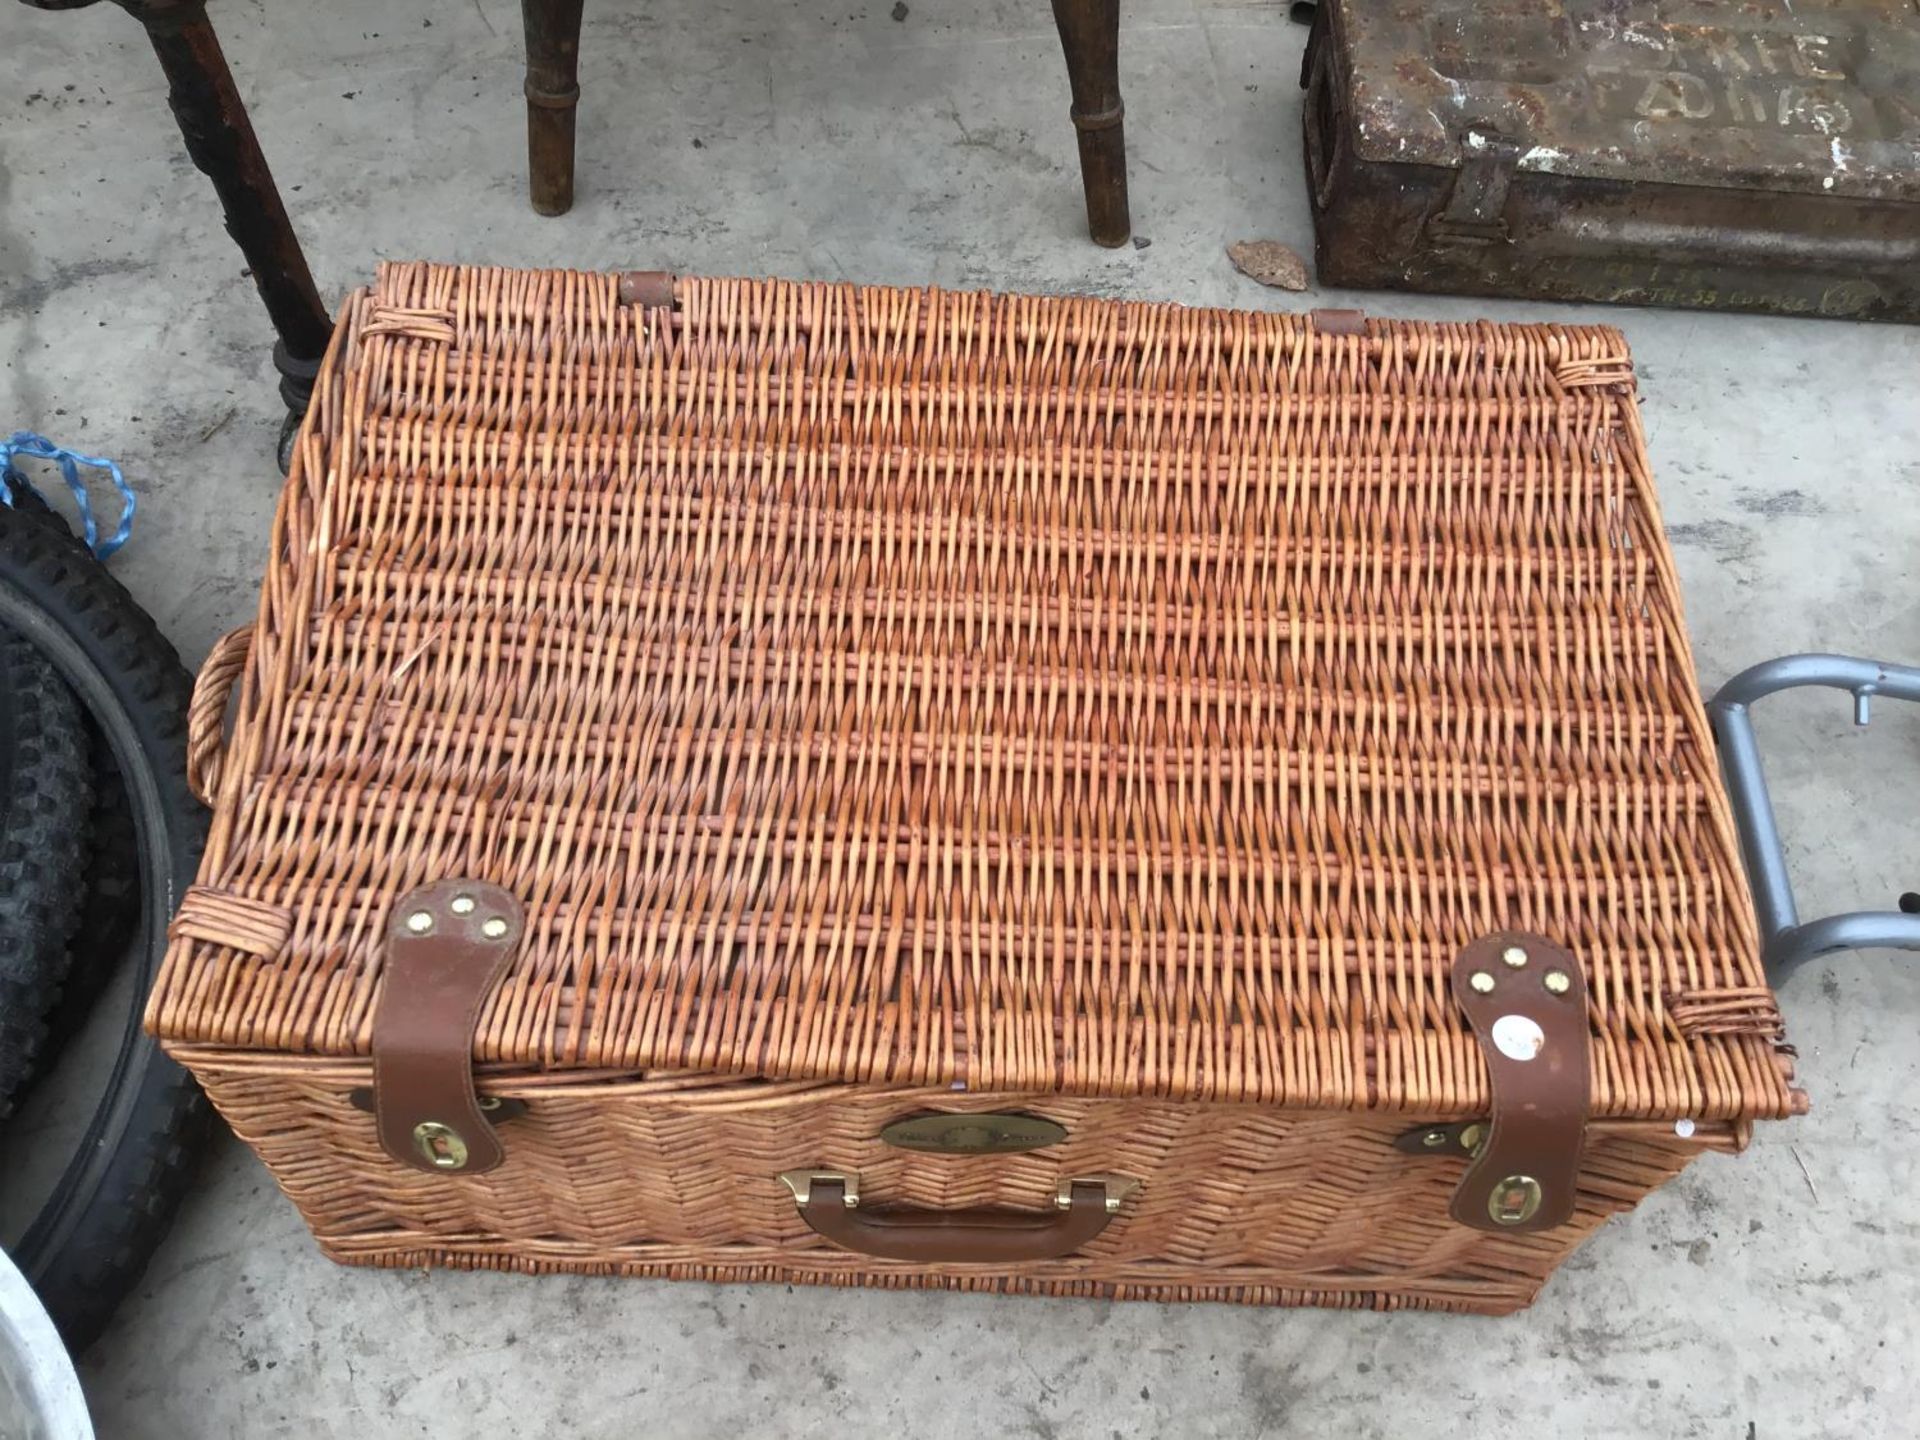 A SHIRE GREEN PICNIC BASKET WITH METAL CUPS. ORNATE WINE STOPPERS CAMPING PANS ETC - Image 2 of 4